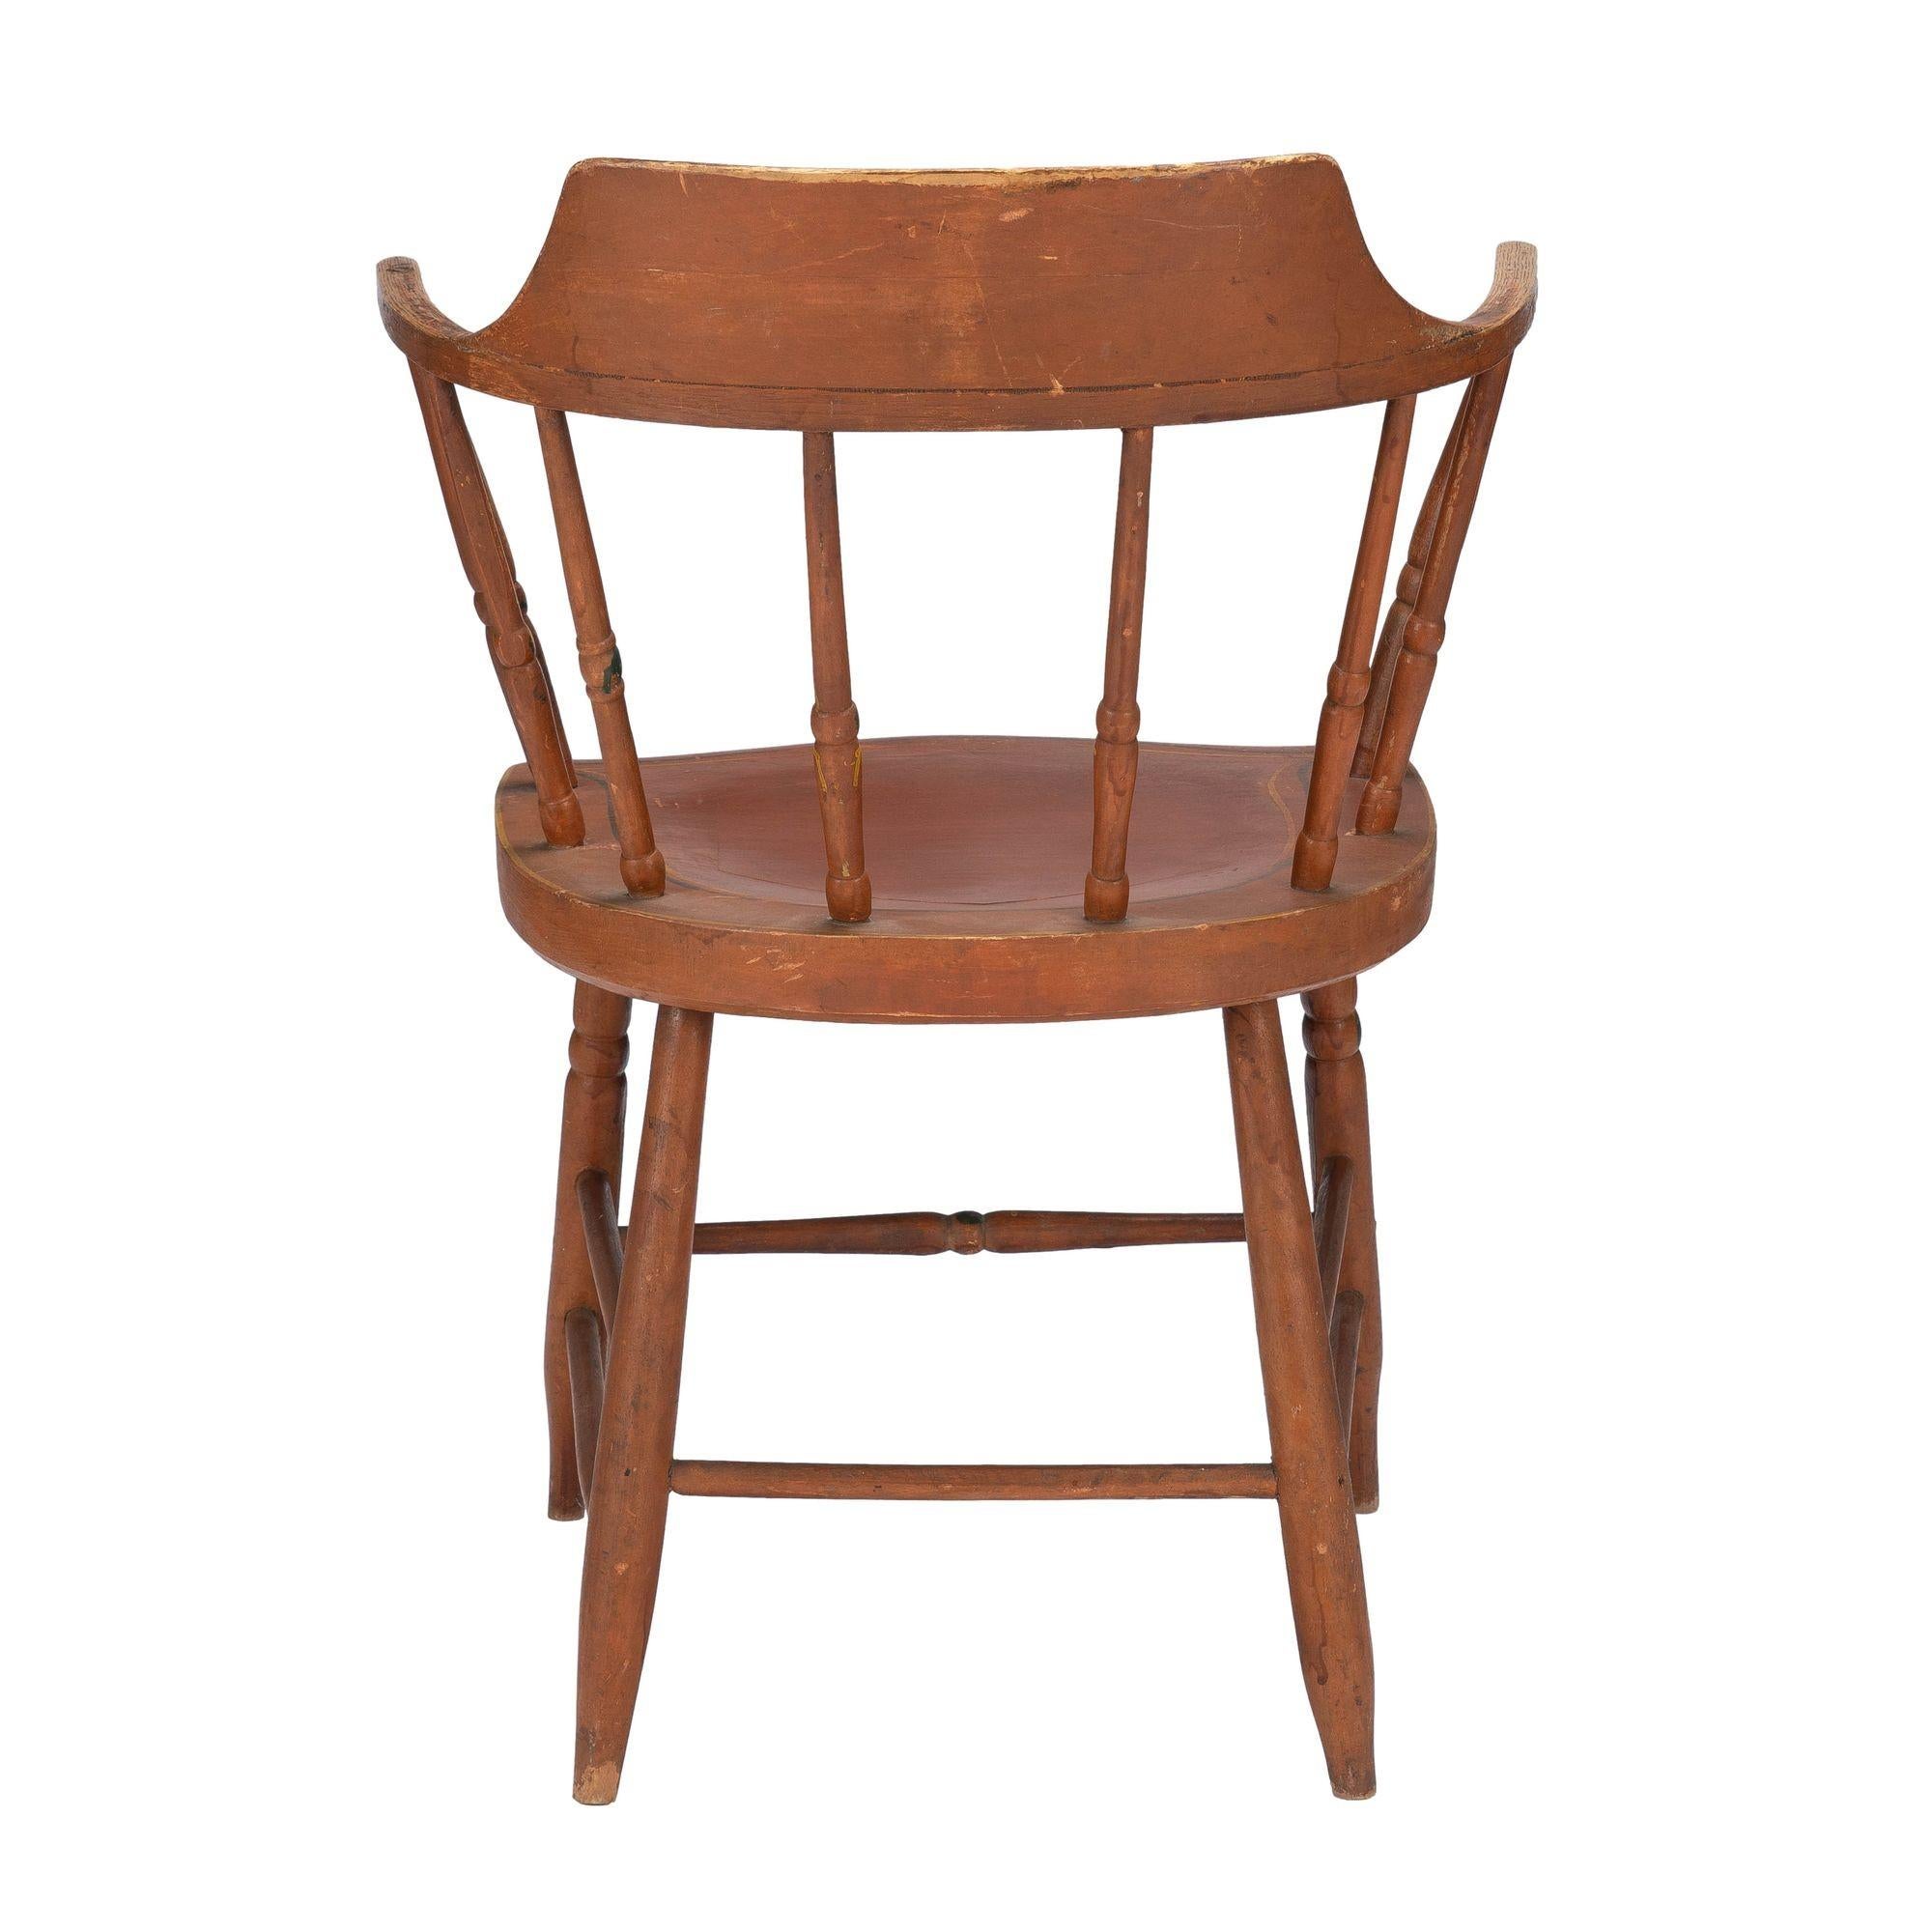 19th Century American Painted Windsor Captain's Chair, c. 1820 For Sale